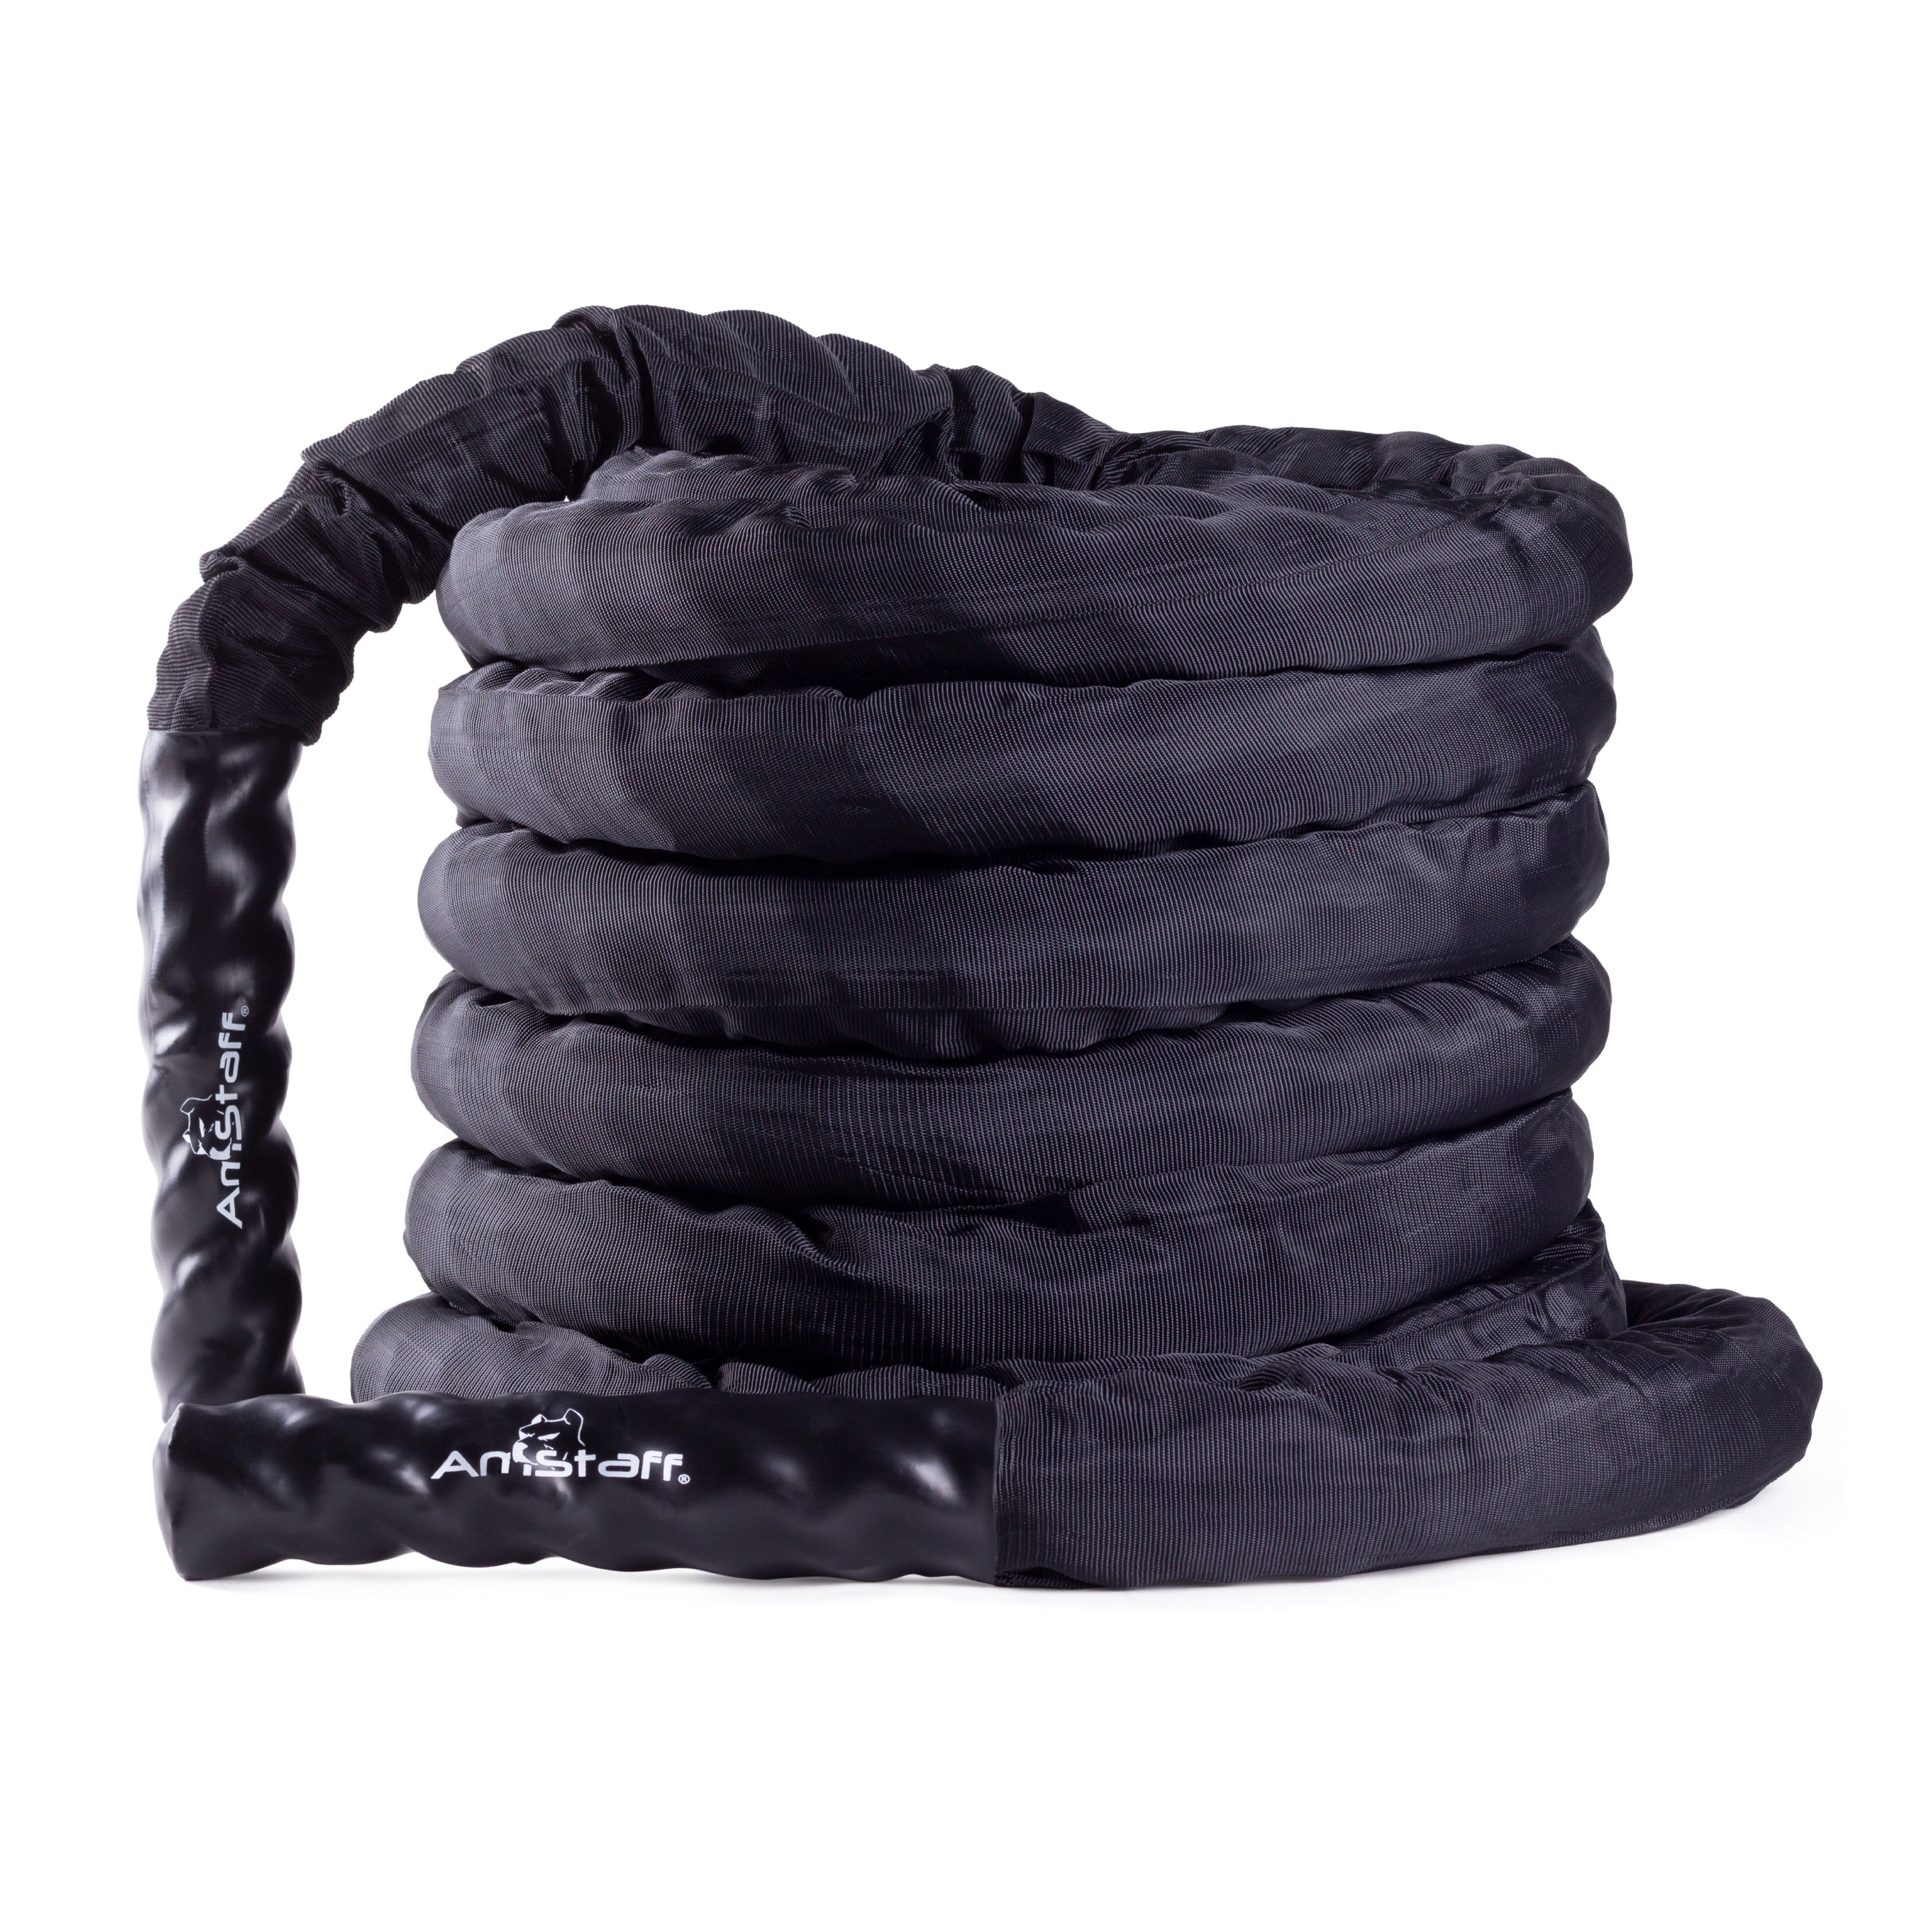 50' Undulation Rope - Battle Rope with Sleeve 1.5